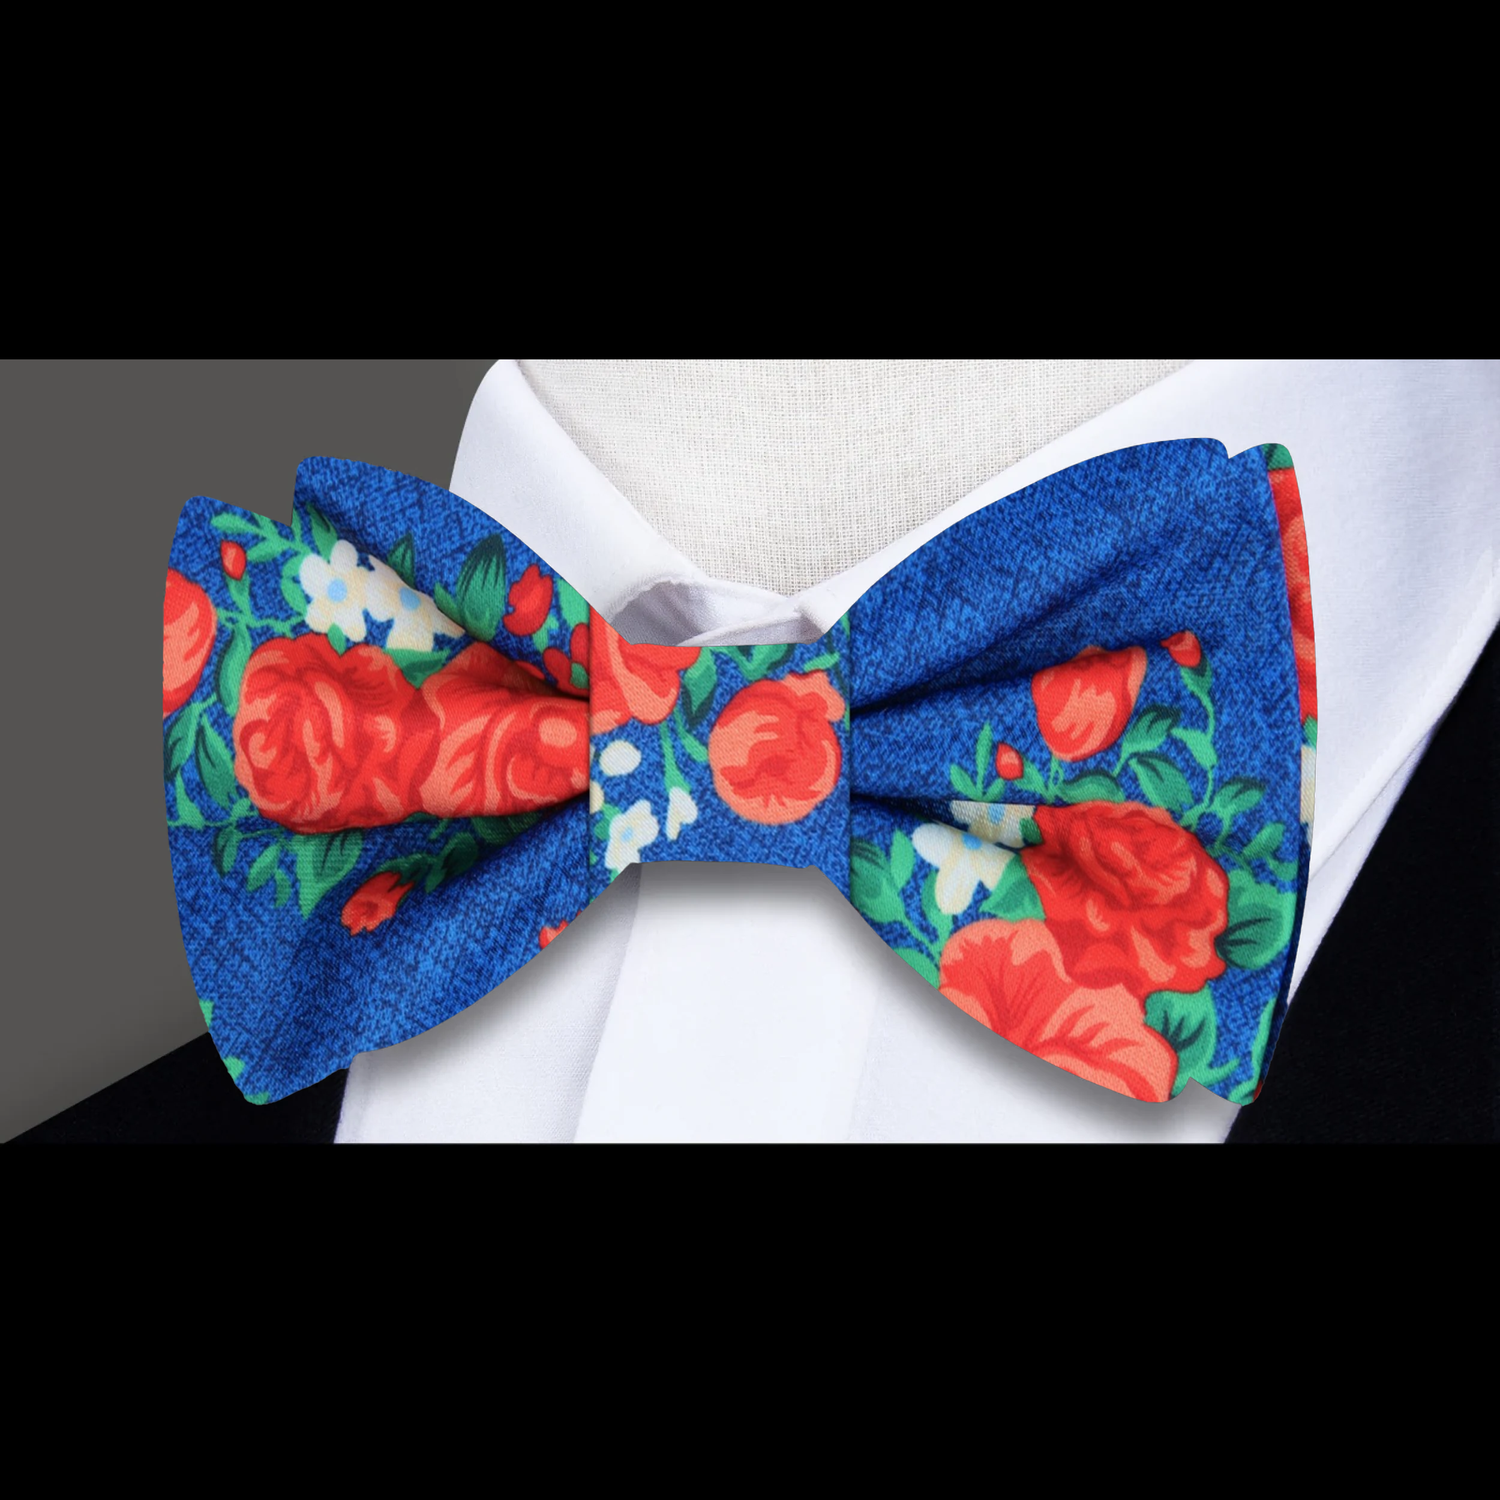 Rich Blue, Red, Green Rose Bunches Bow Tie  